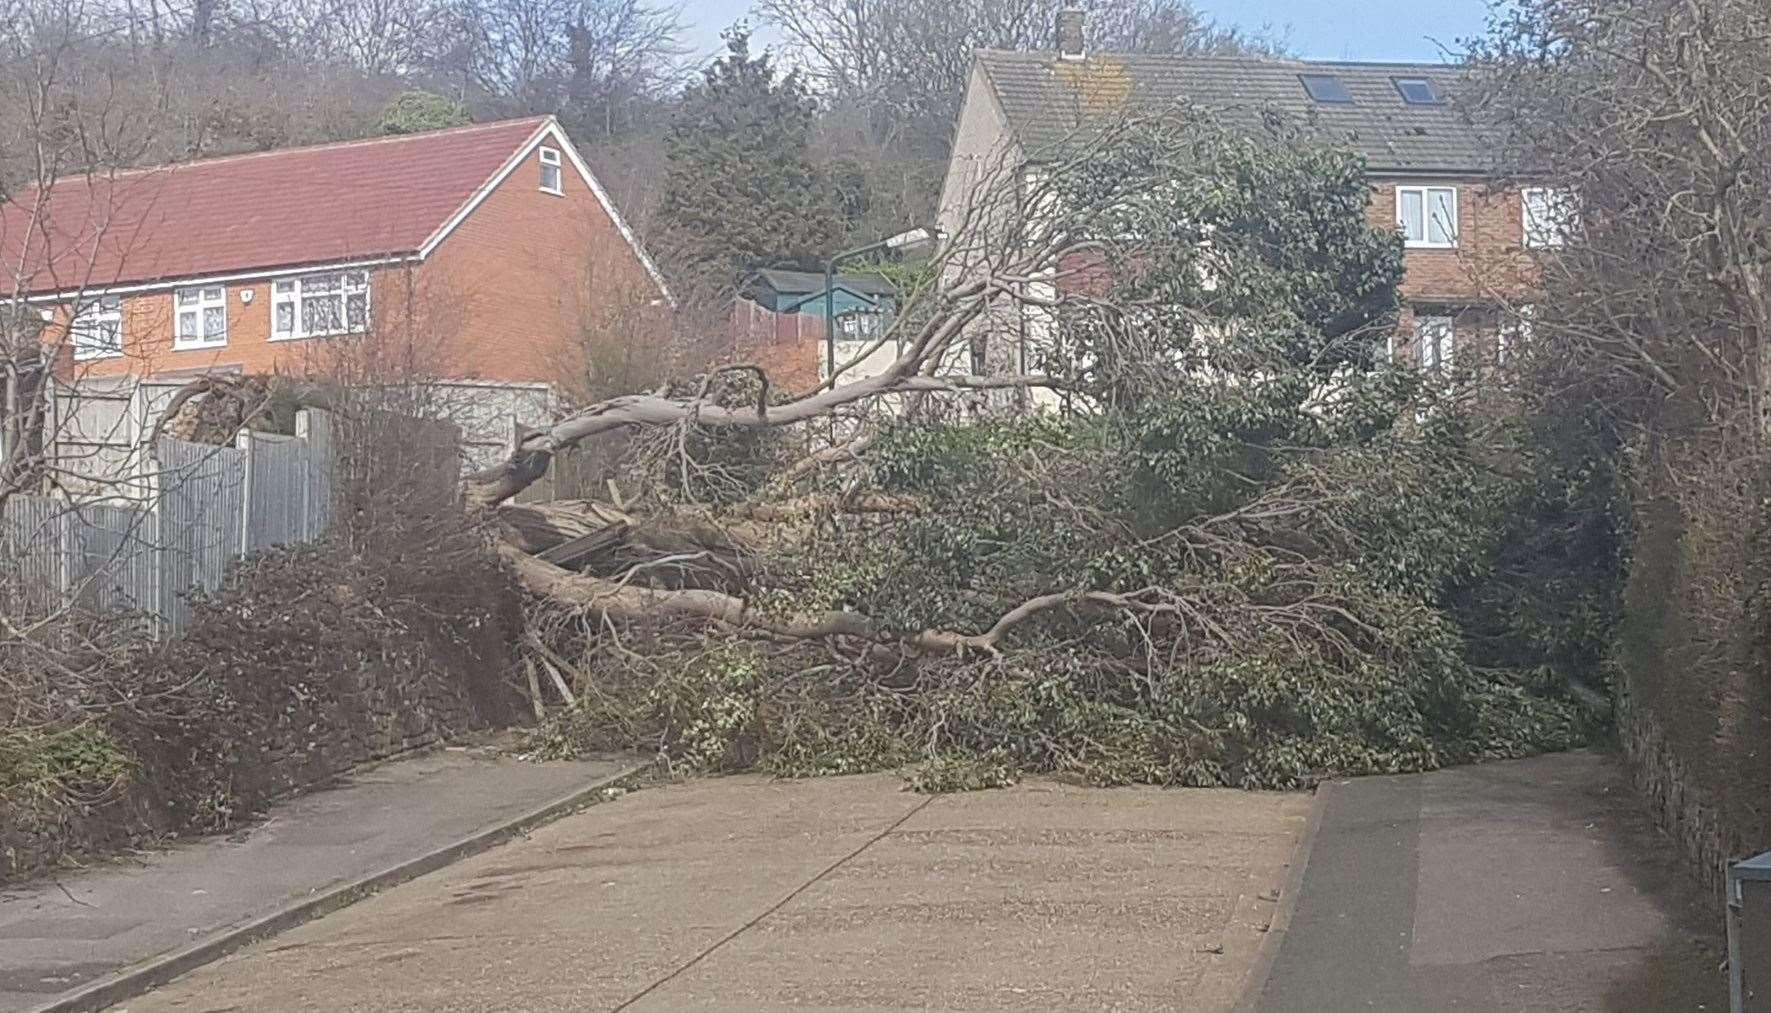 High winds brought down a tree in Carnation Road, Strood. Picture: Dawn Ellis